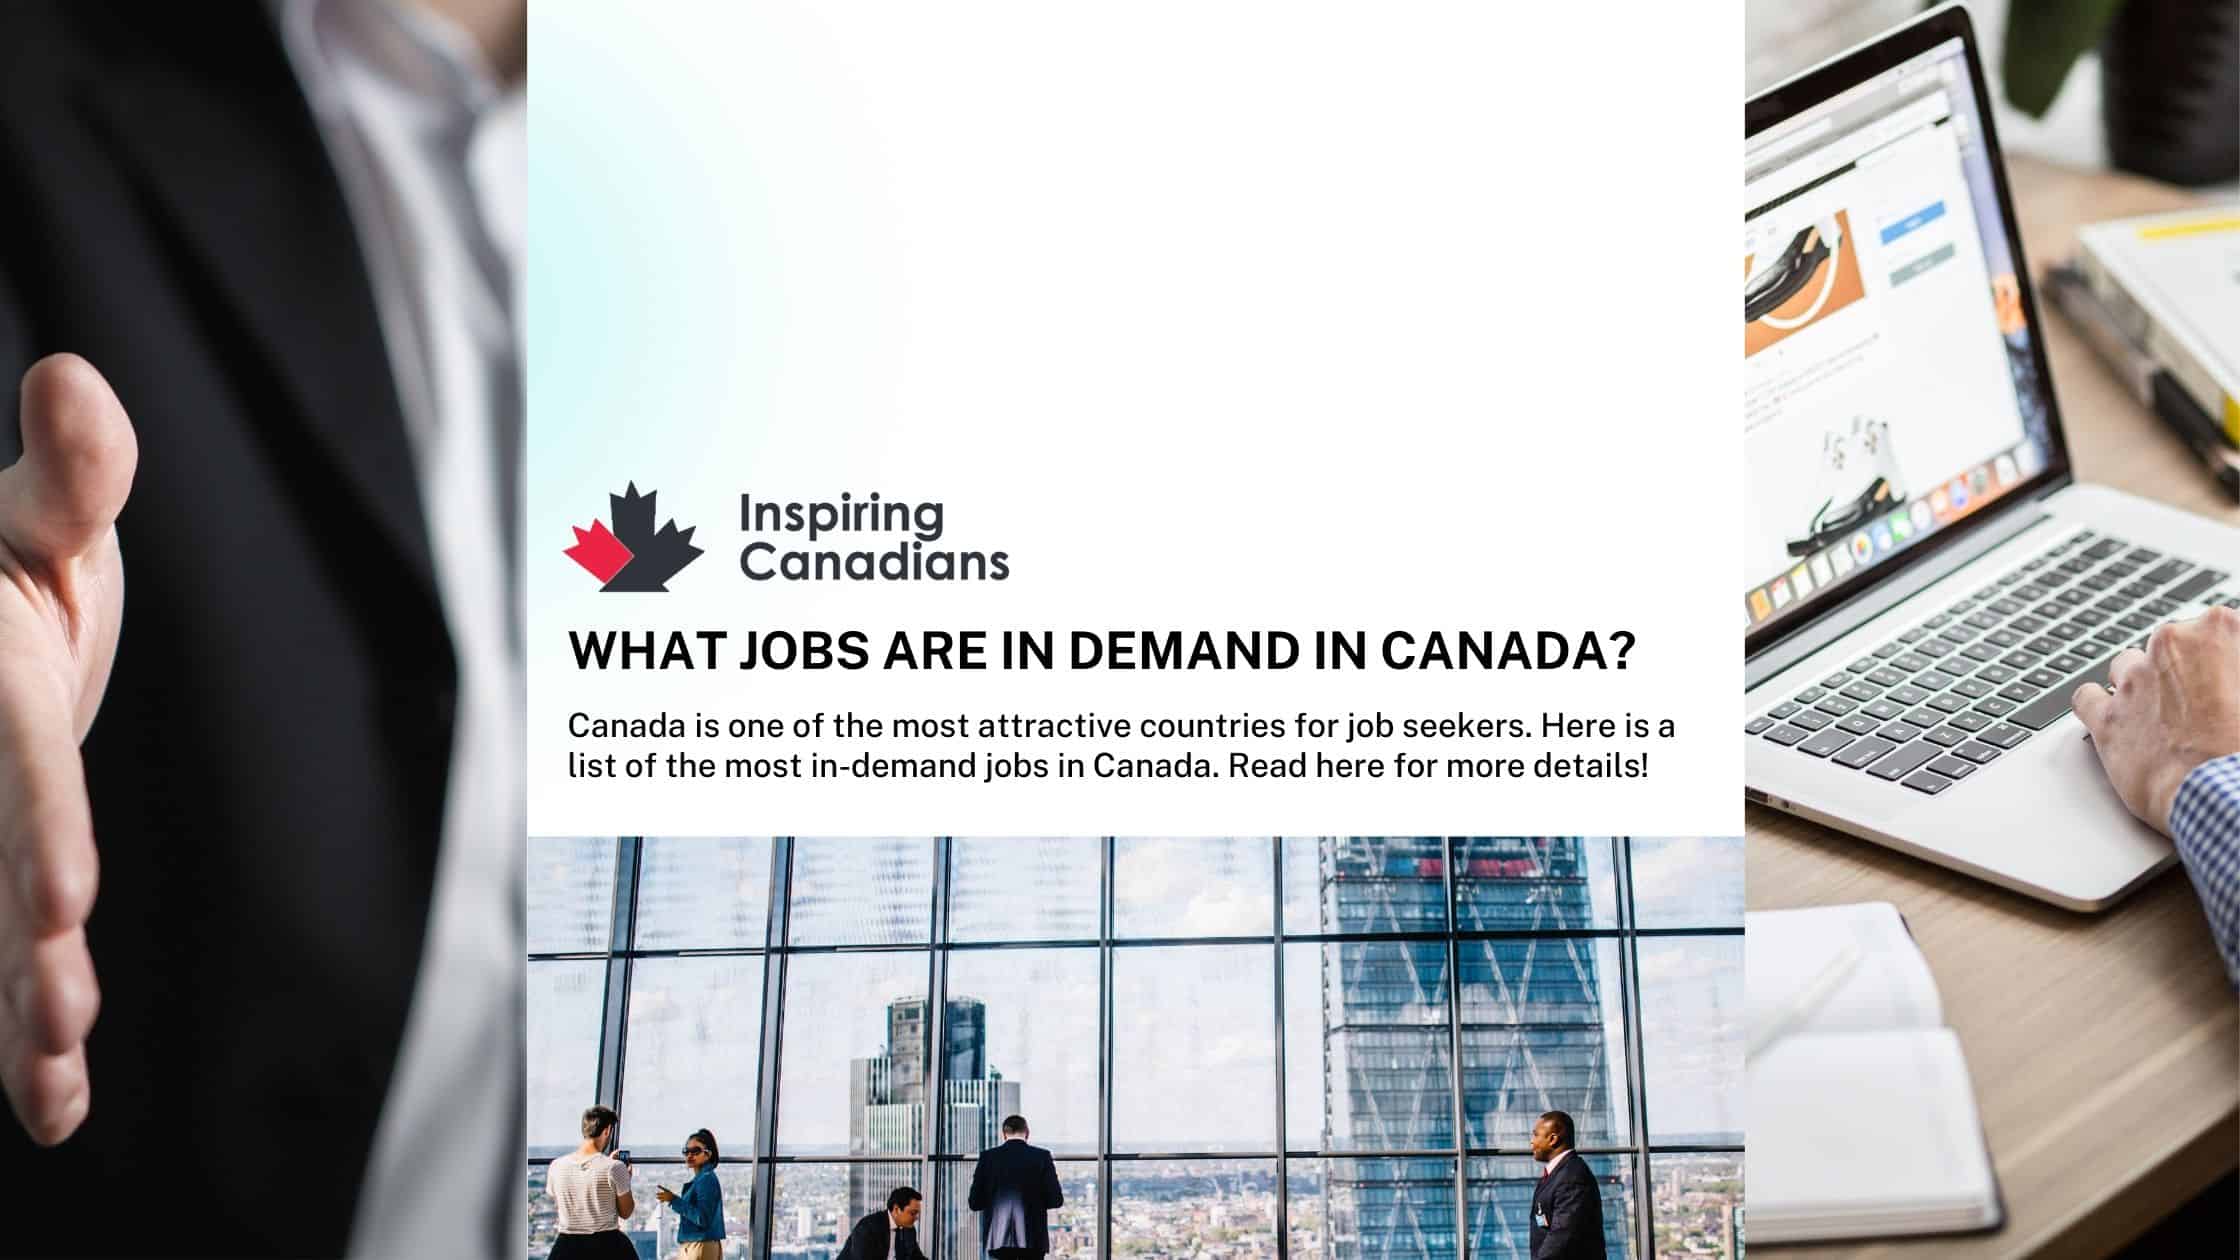 What jobs are in demand in Canada?